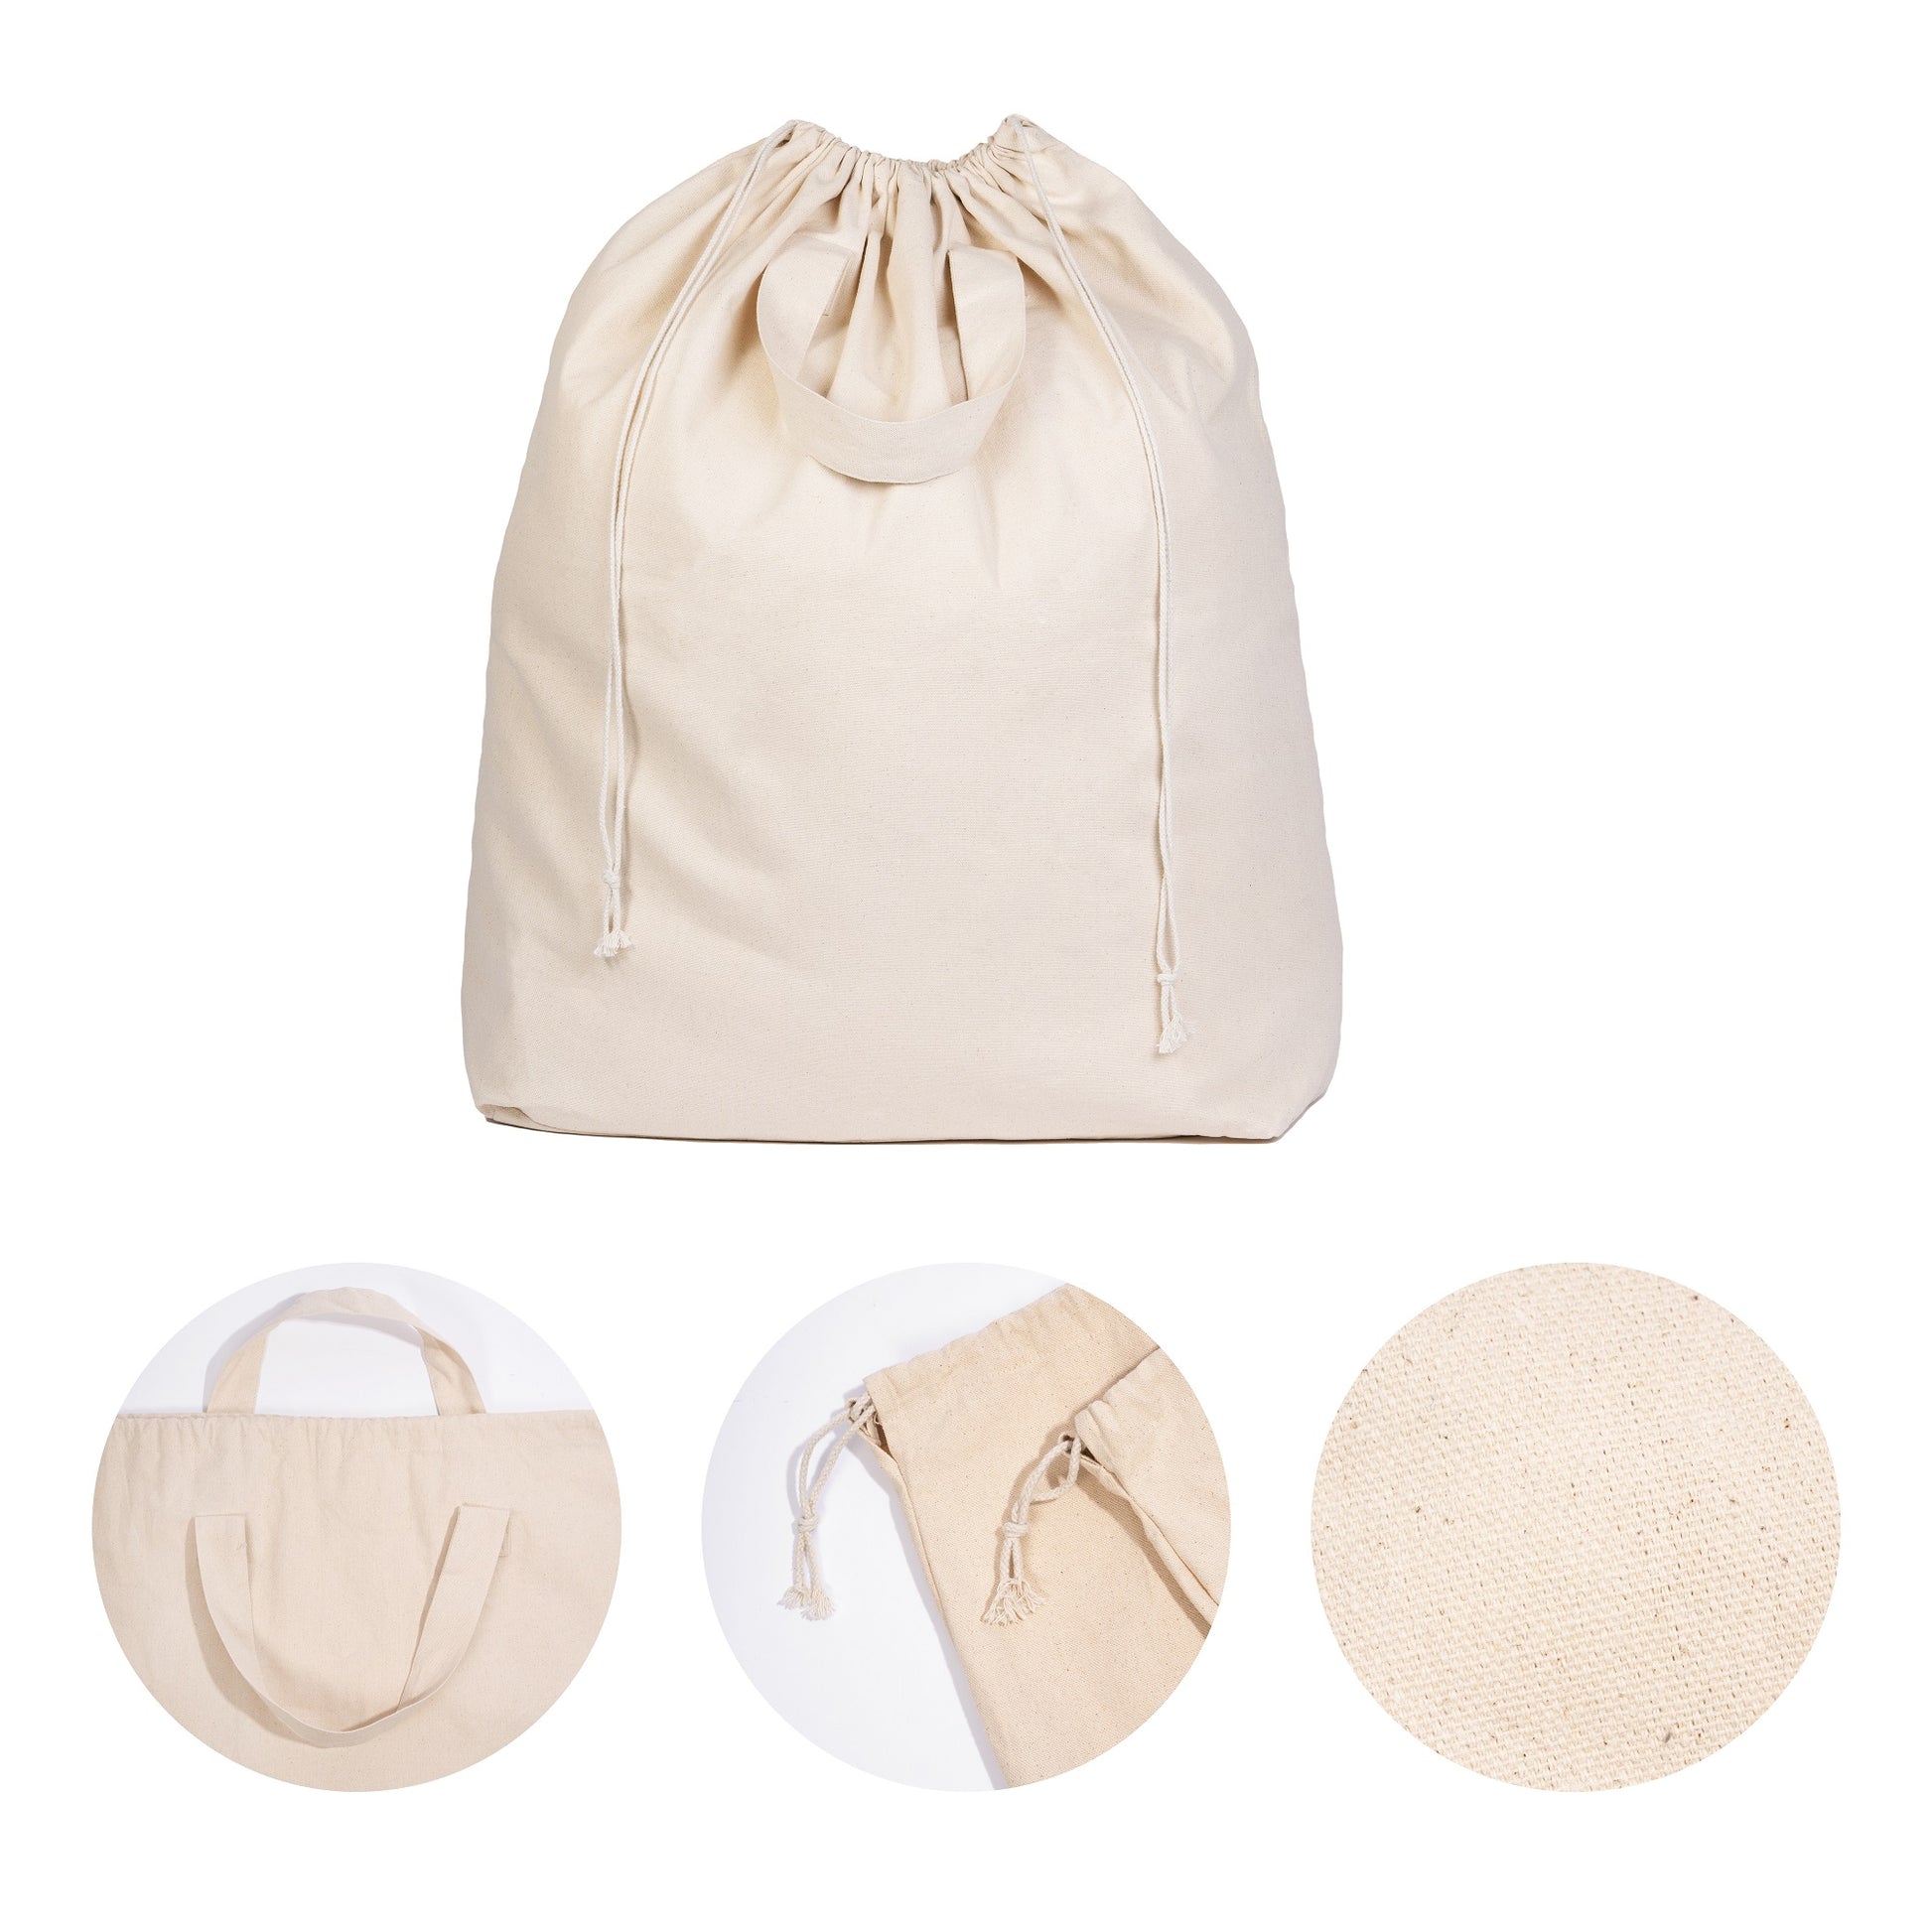 Small Laundry Bags, Canvas Laundry Bags